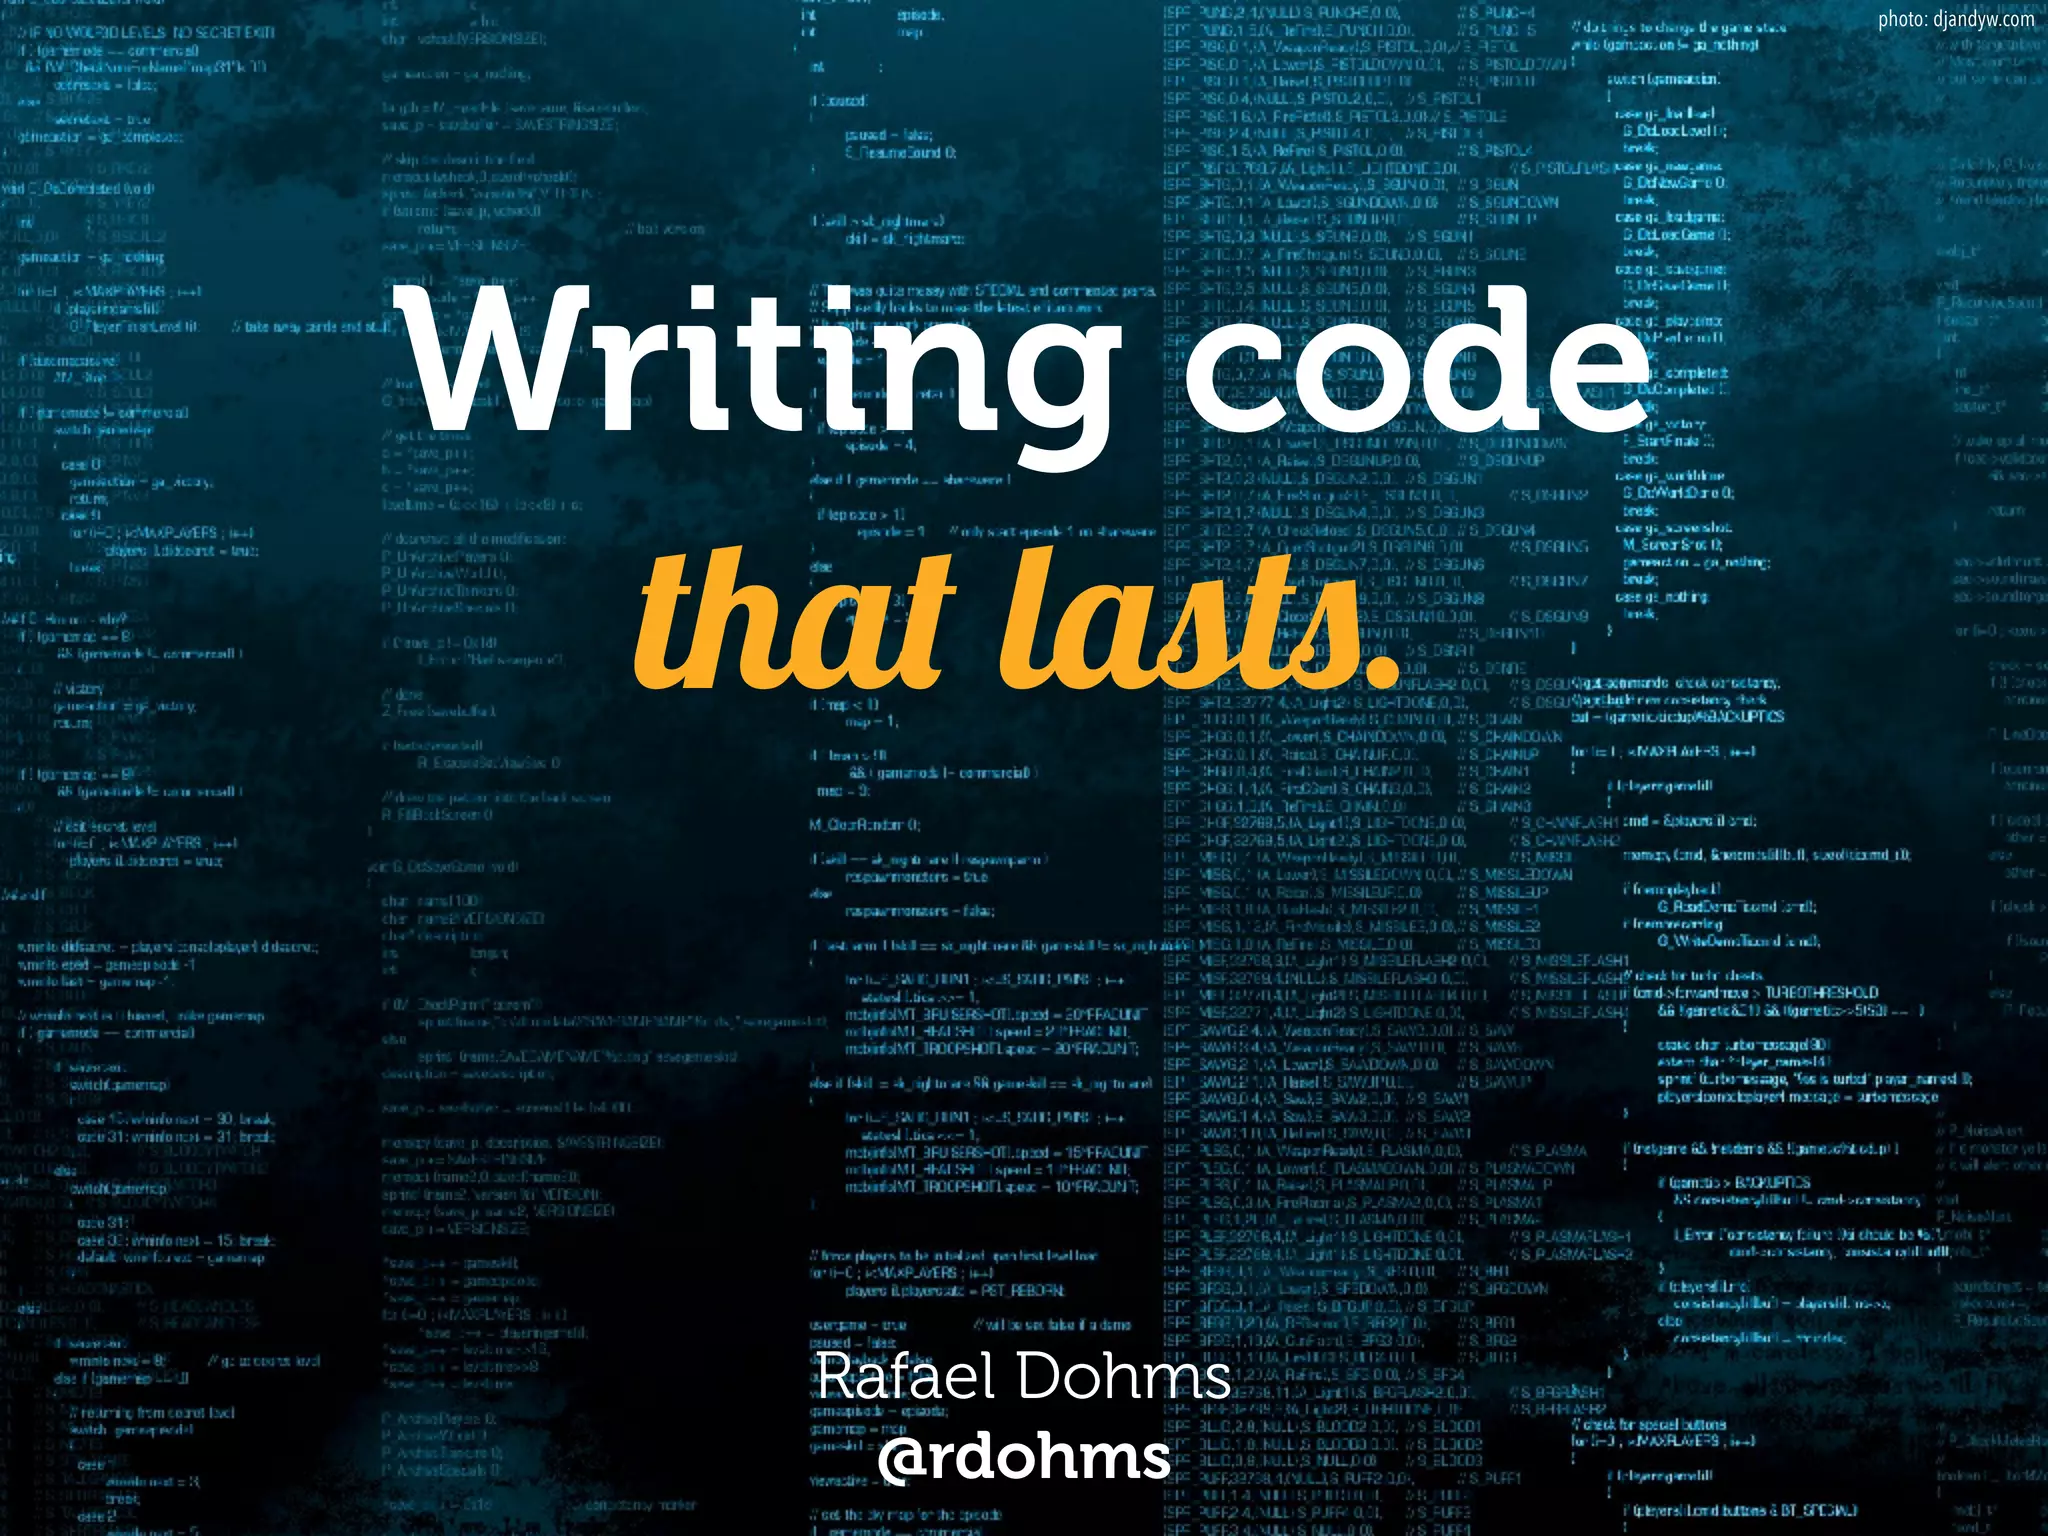 “Writing code that lasts” … or writing code you won’t hate tomorrow